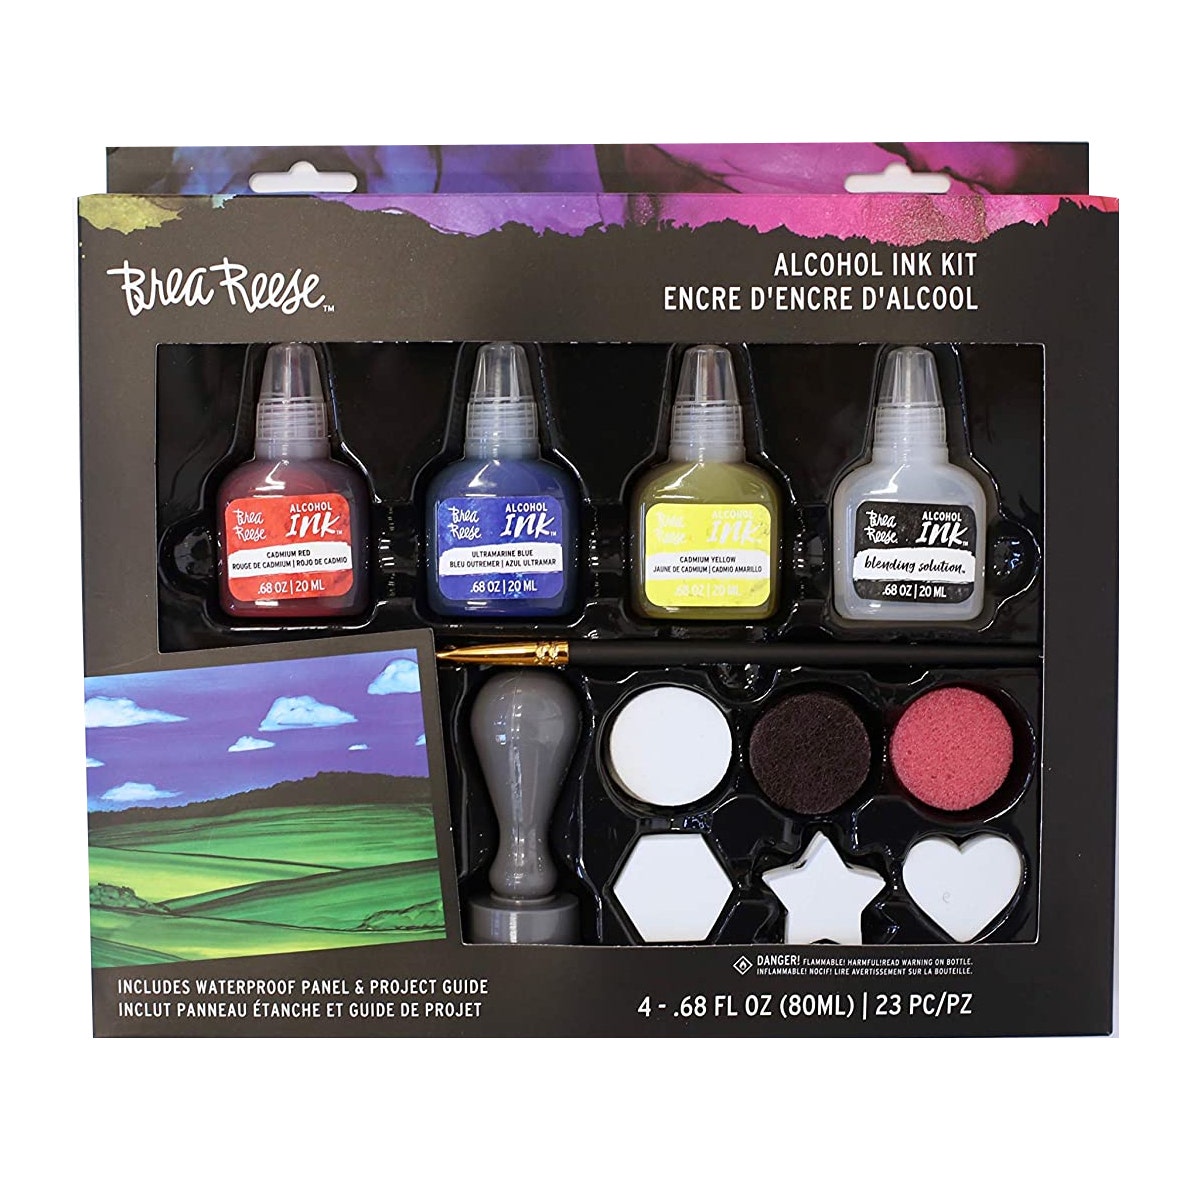 Brea Reese Alcohol Ink Kit – Art Set Complete With Project Guide